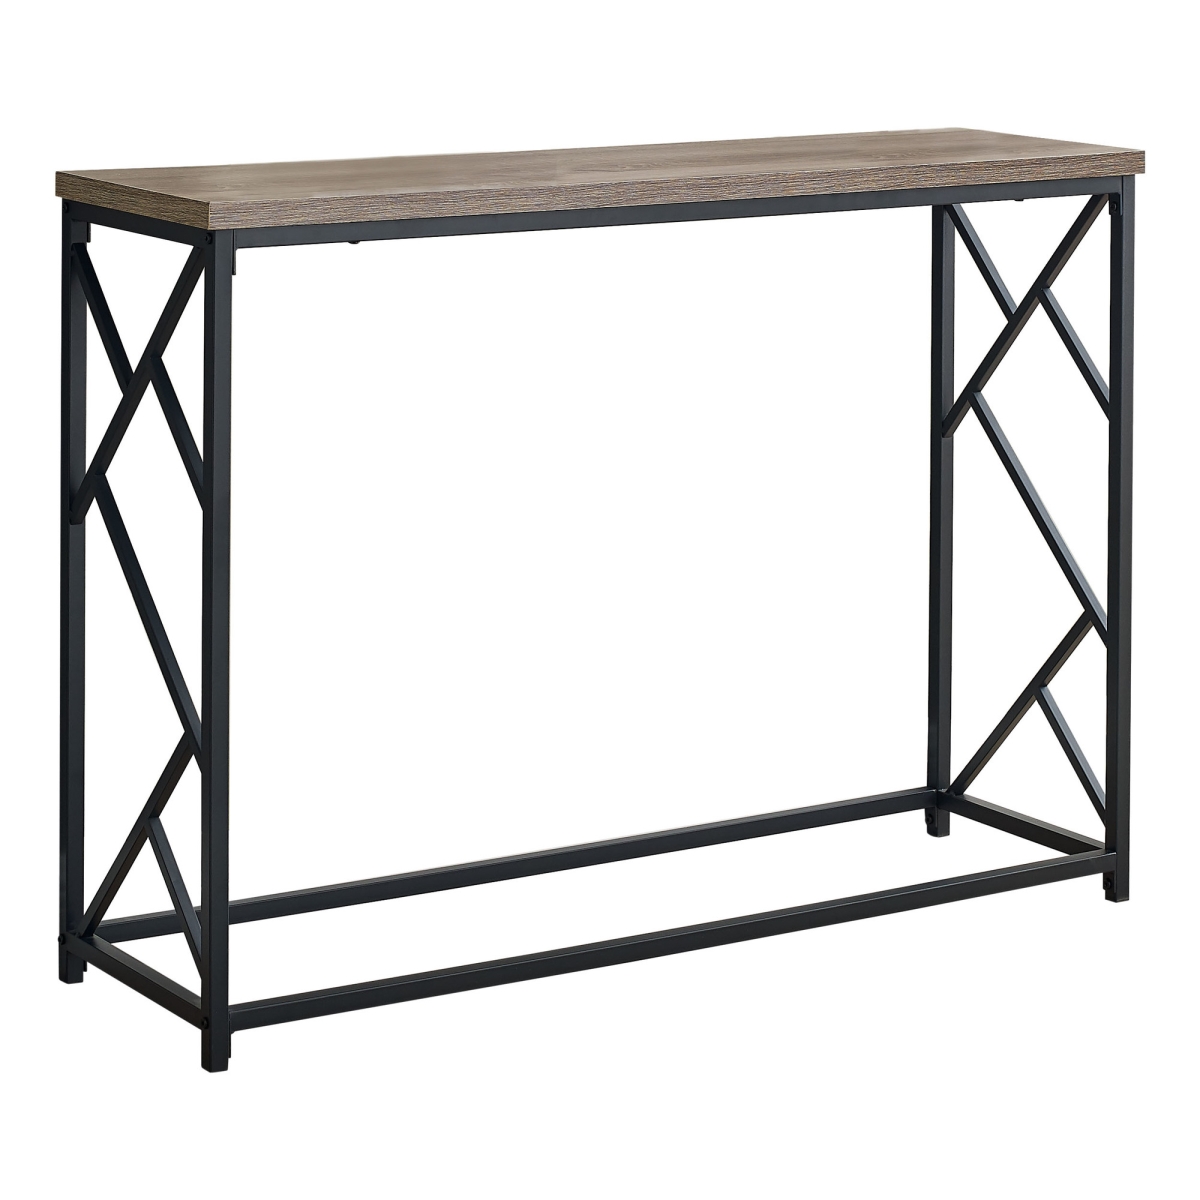 I 3533 44 In. Hall Console Accent Table, Taupe - Black Metal Finish